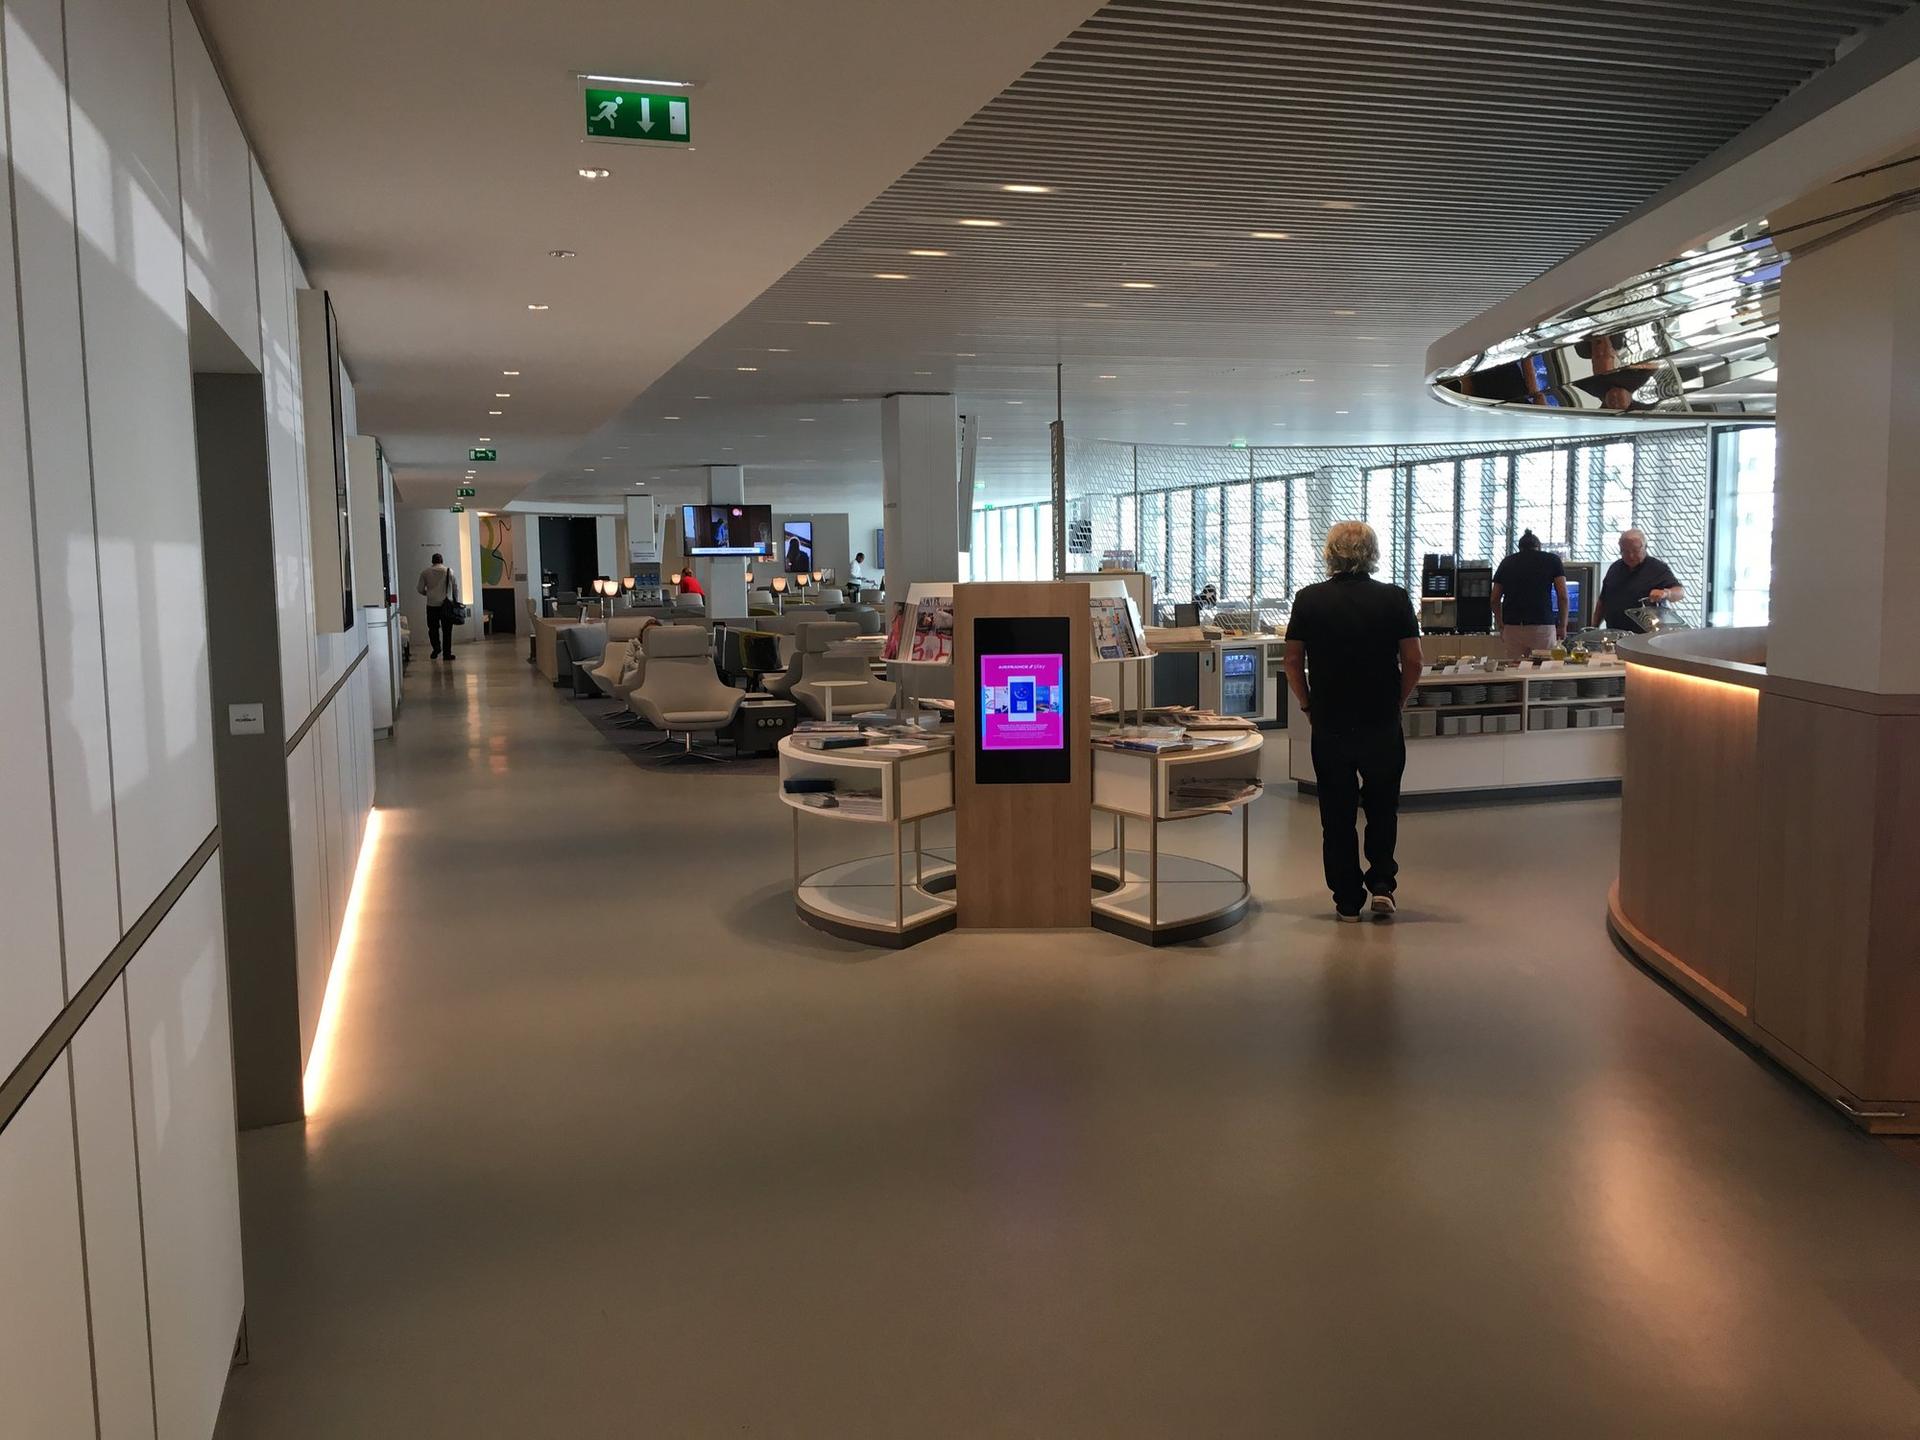 Air France Lounge (Concourse L) image 10 of 57